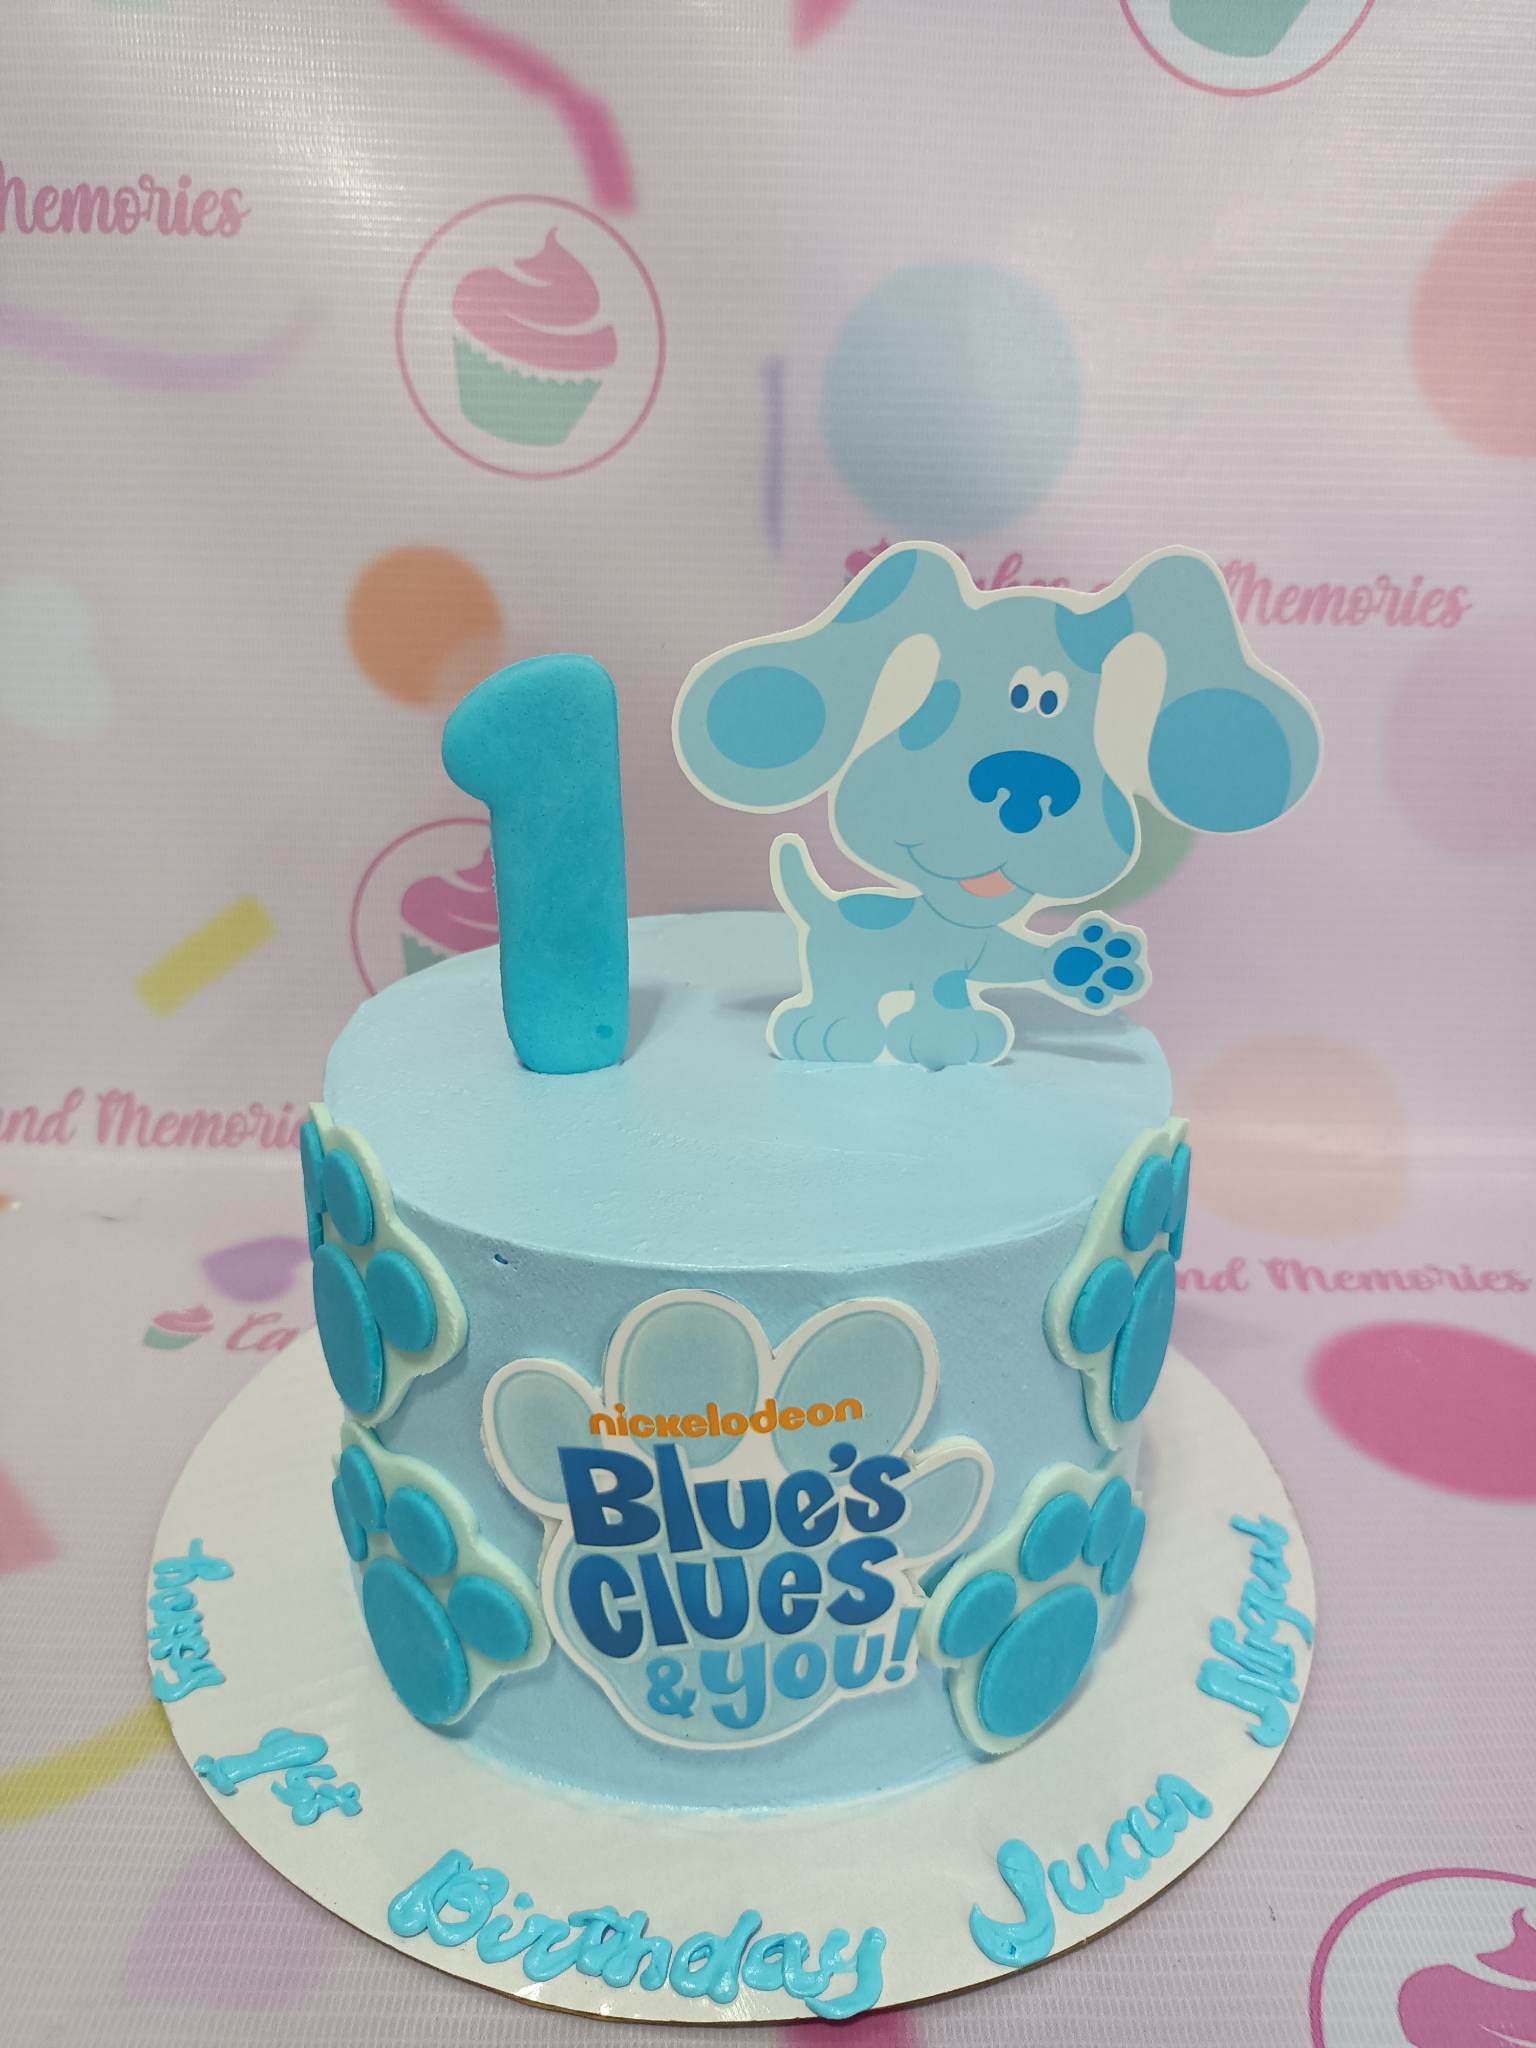 toddlers tv show

This custom decorated Blues Clues Cake is perfect for your kids and toddlers! Featuring blue paws on a vanilla or chocolate cake, this cake accurately replicates the popular TV show and will have your kids and toddlers in awe of its detailed design. Our cakes are of the highest quality and decorated with the freshest ingredients.